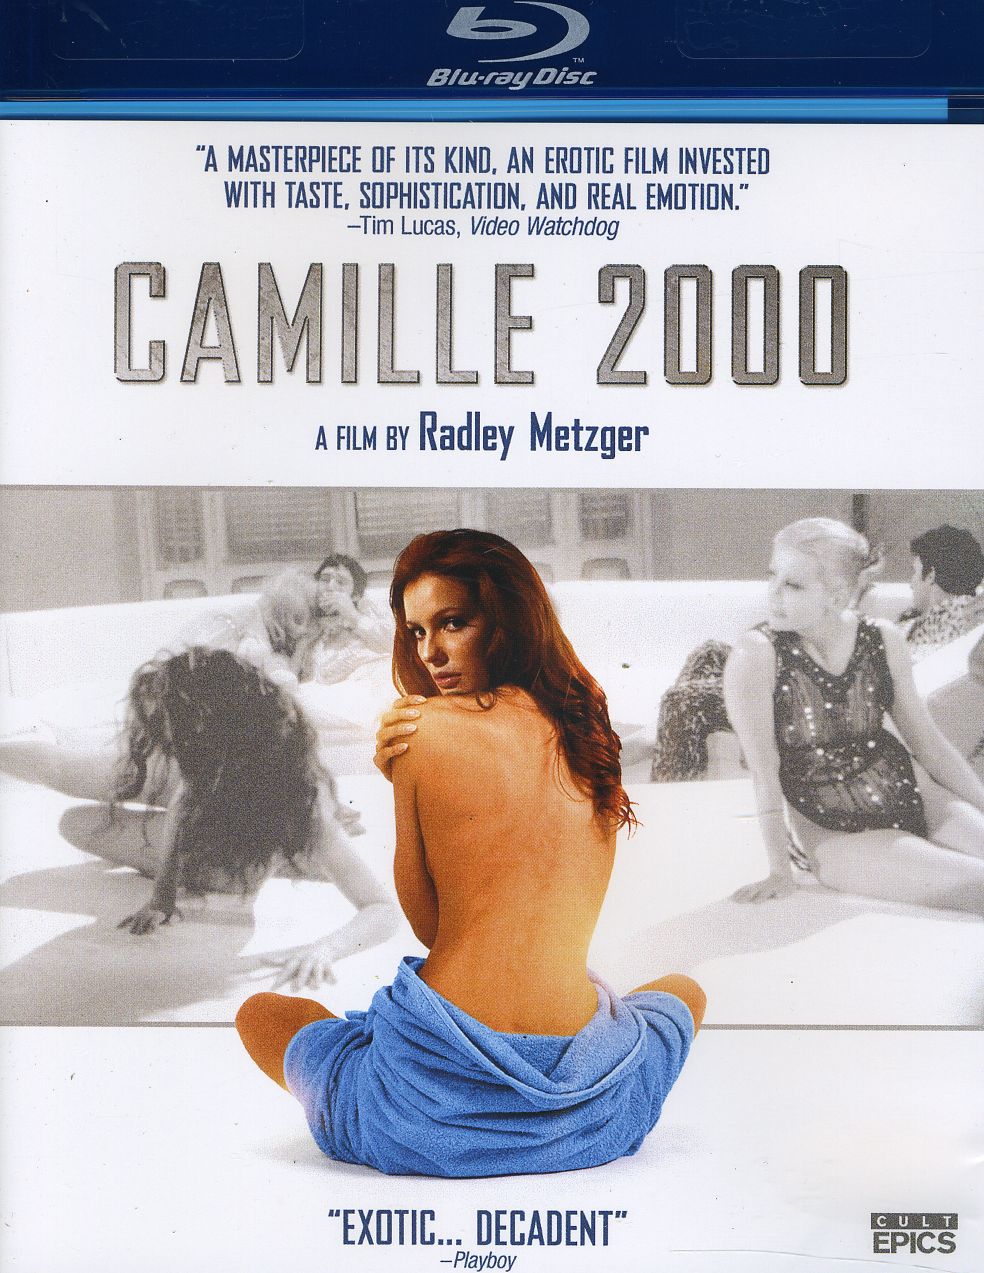 CAMILLE 2000 / (WS)